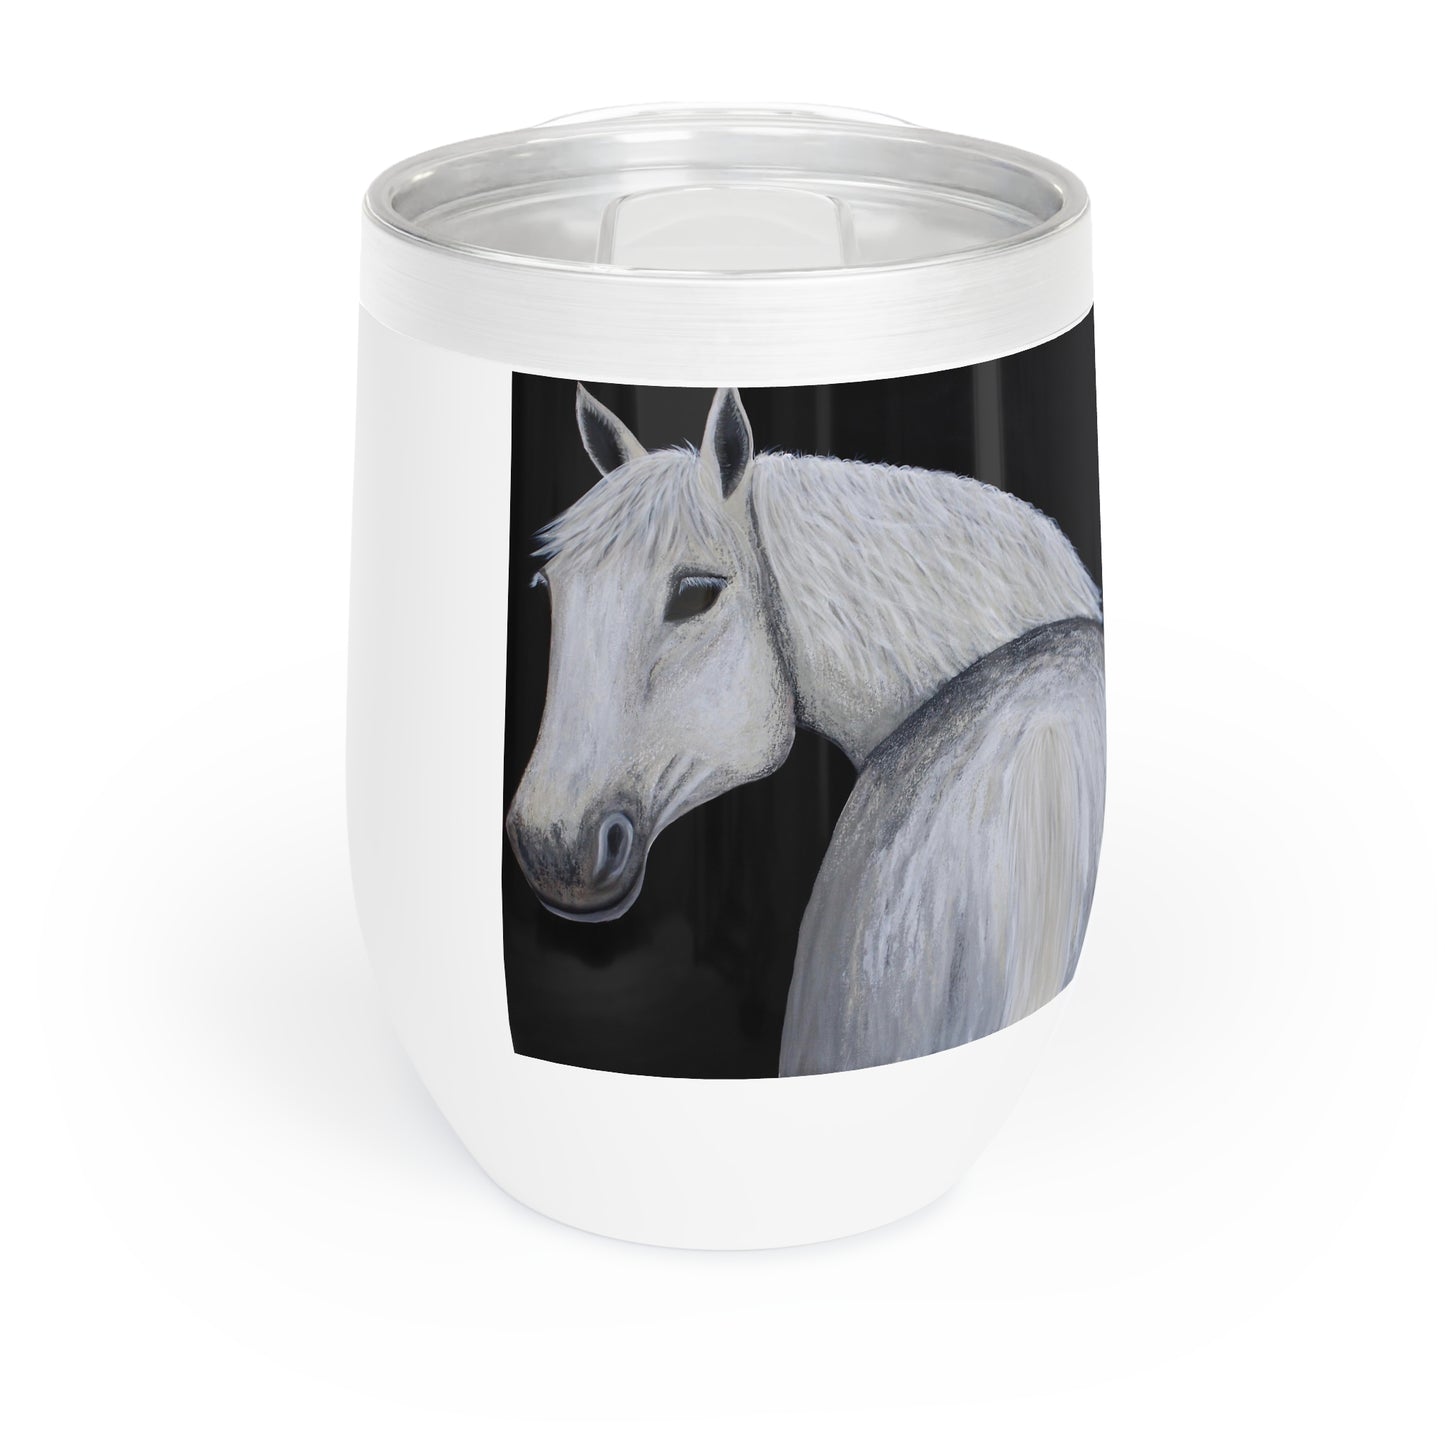 Horse wine cooler - Chill Wine Tumbler - Drinks Tumbler - Ghost